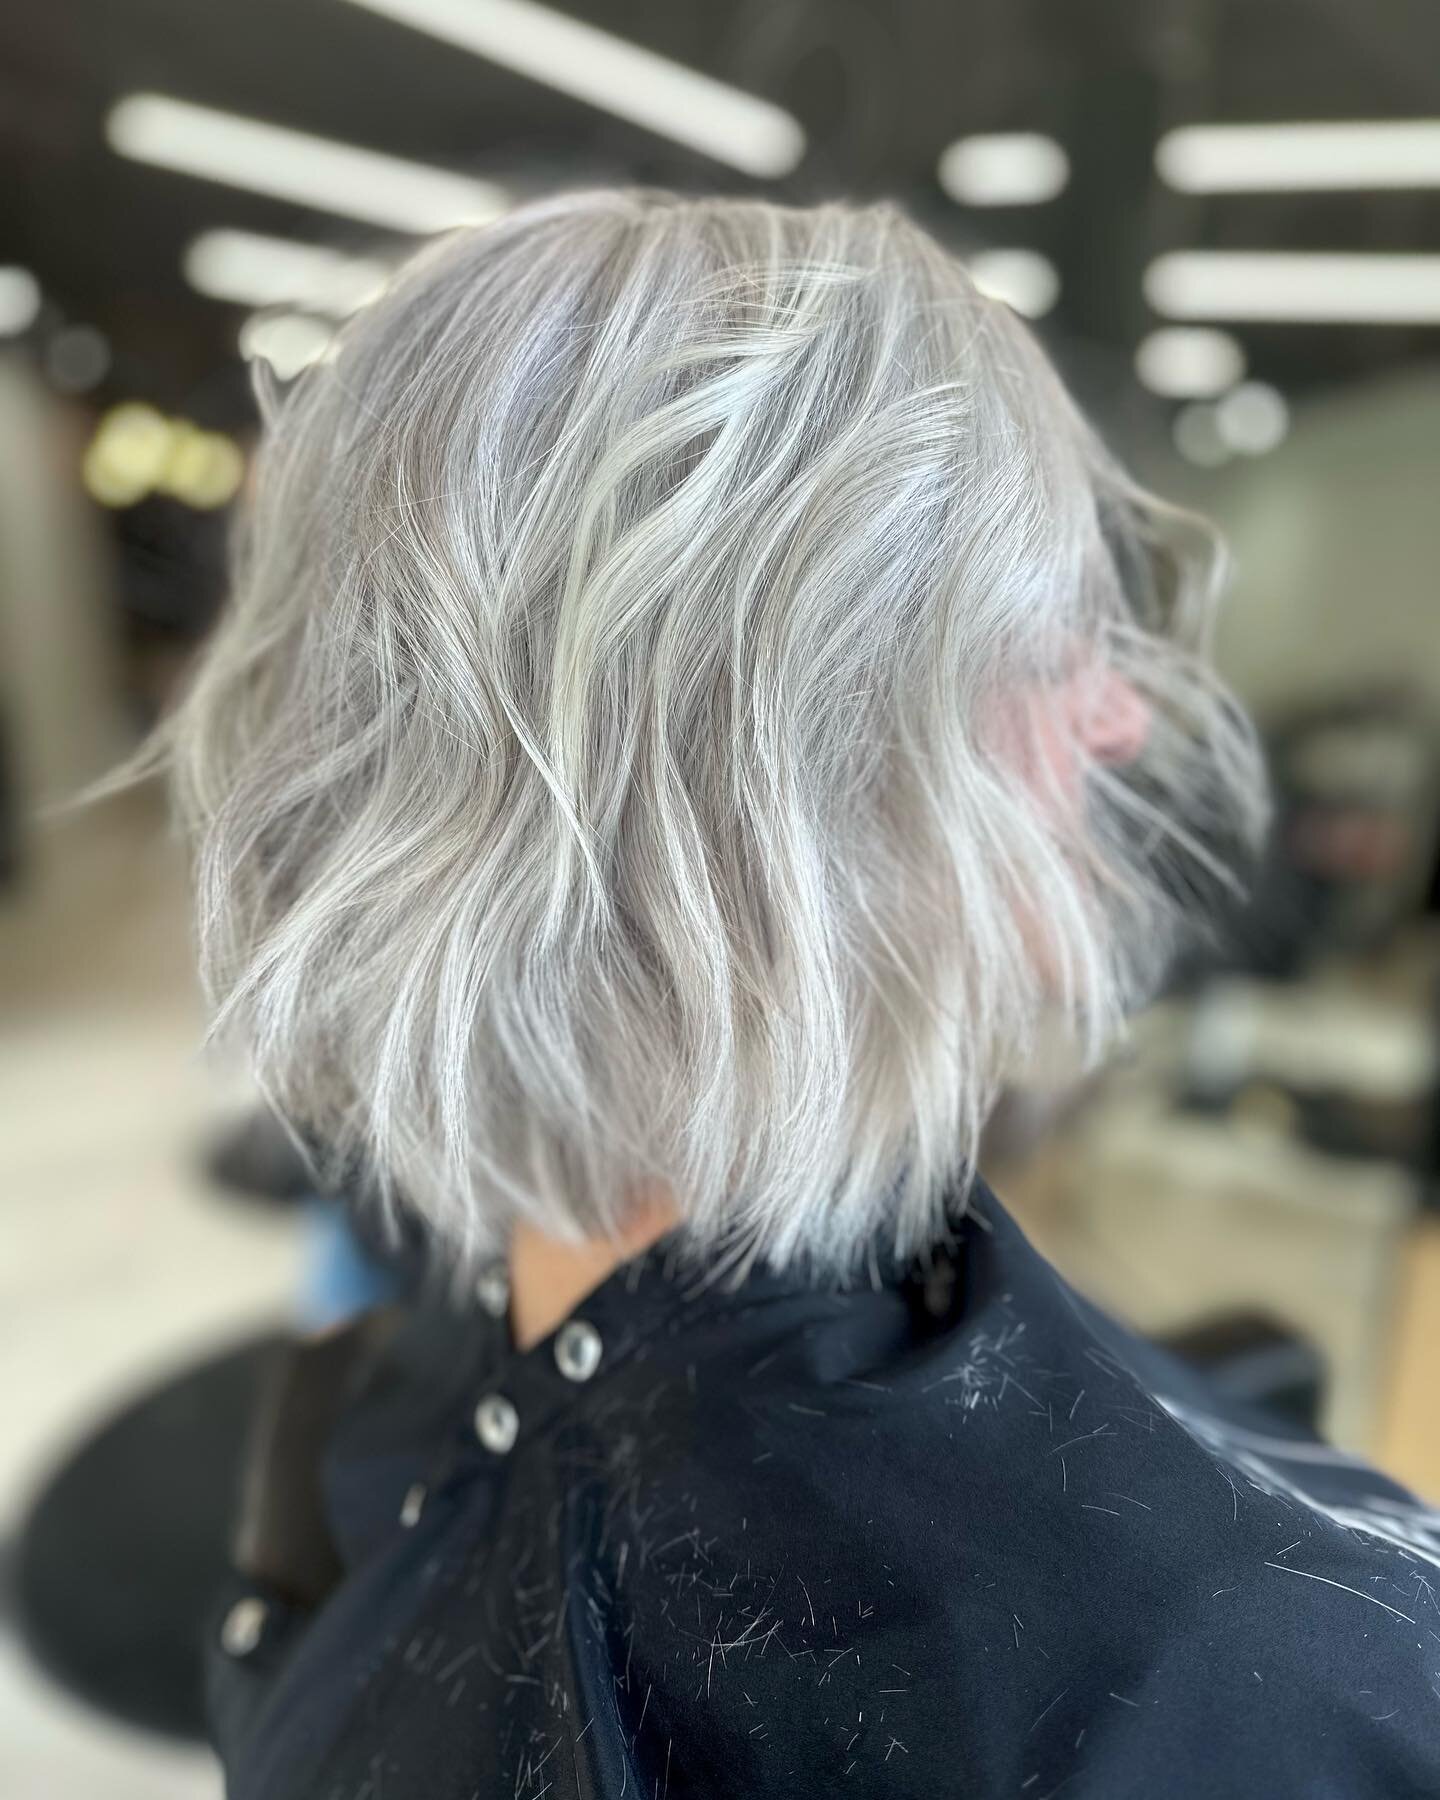 BRB, just going to go obsess over this cut. 
➖
This client came in after cutting her own hair and was looking for a drastic change, Amanda Noble understood the assignment. 
 
Let us know what you think about this before &amp; after! 
@noblehousesquam